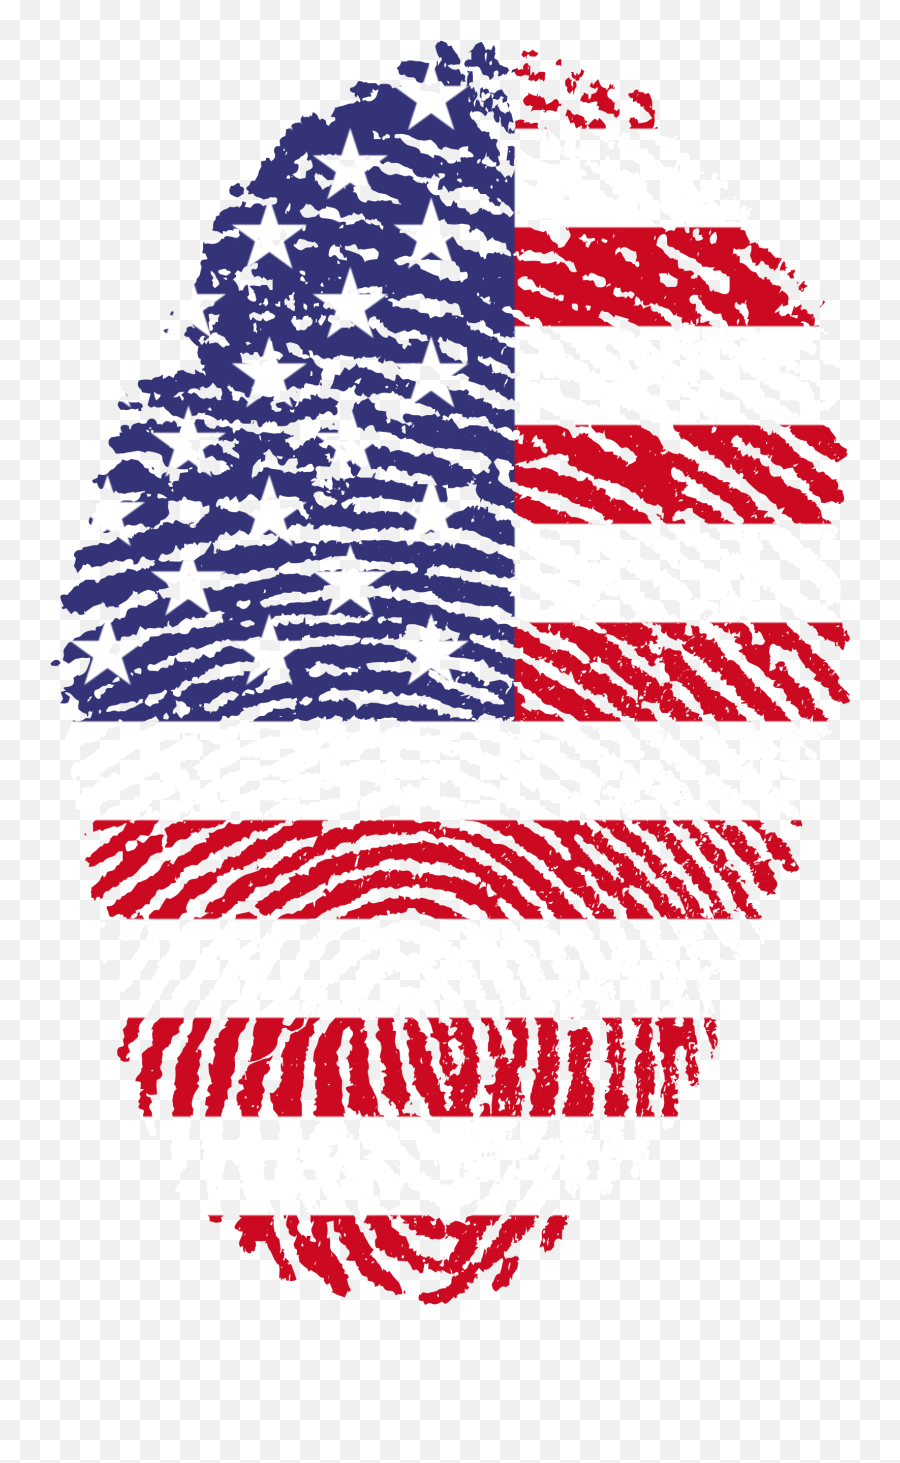 Snappygoatcom - Free Public Domain Images Snappygoatcom American Flag Fingerprint Png,United States Flag Png